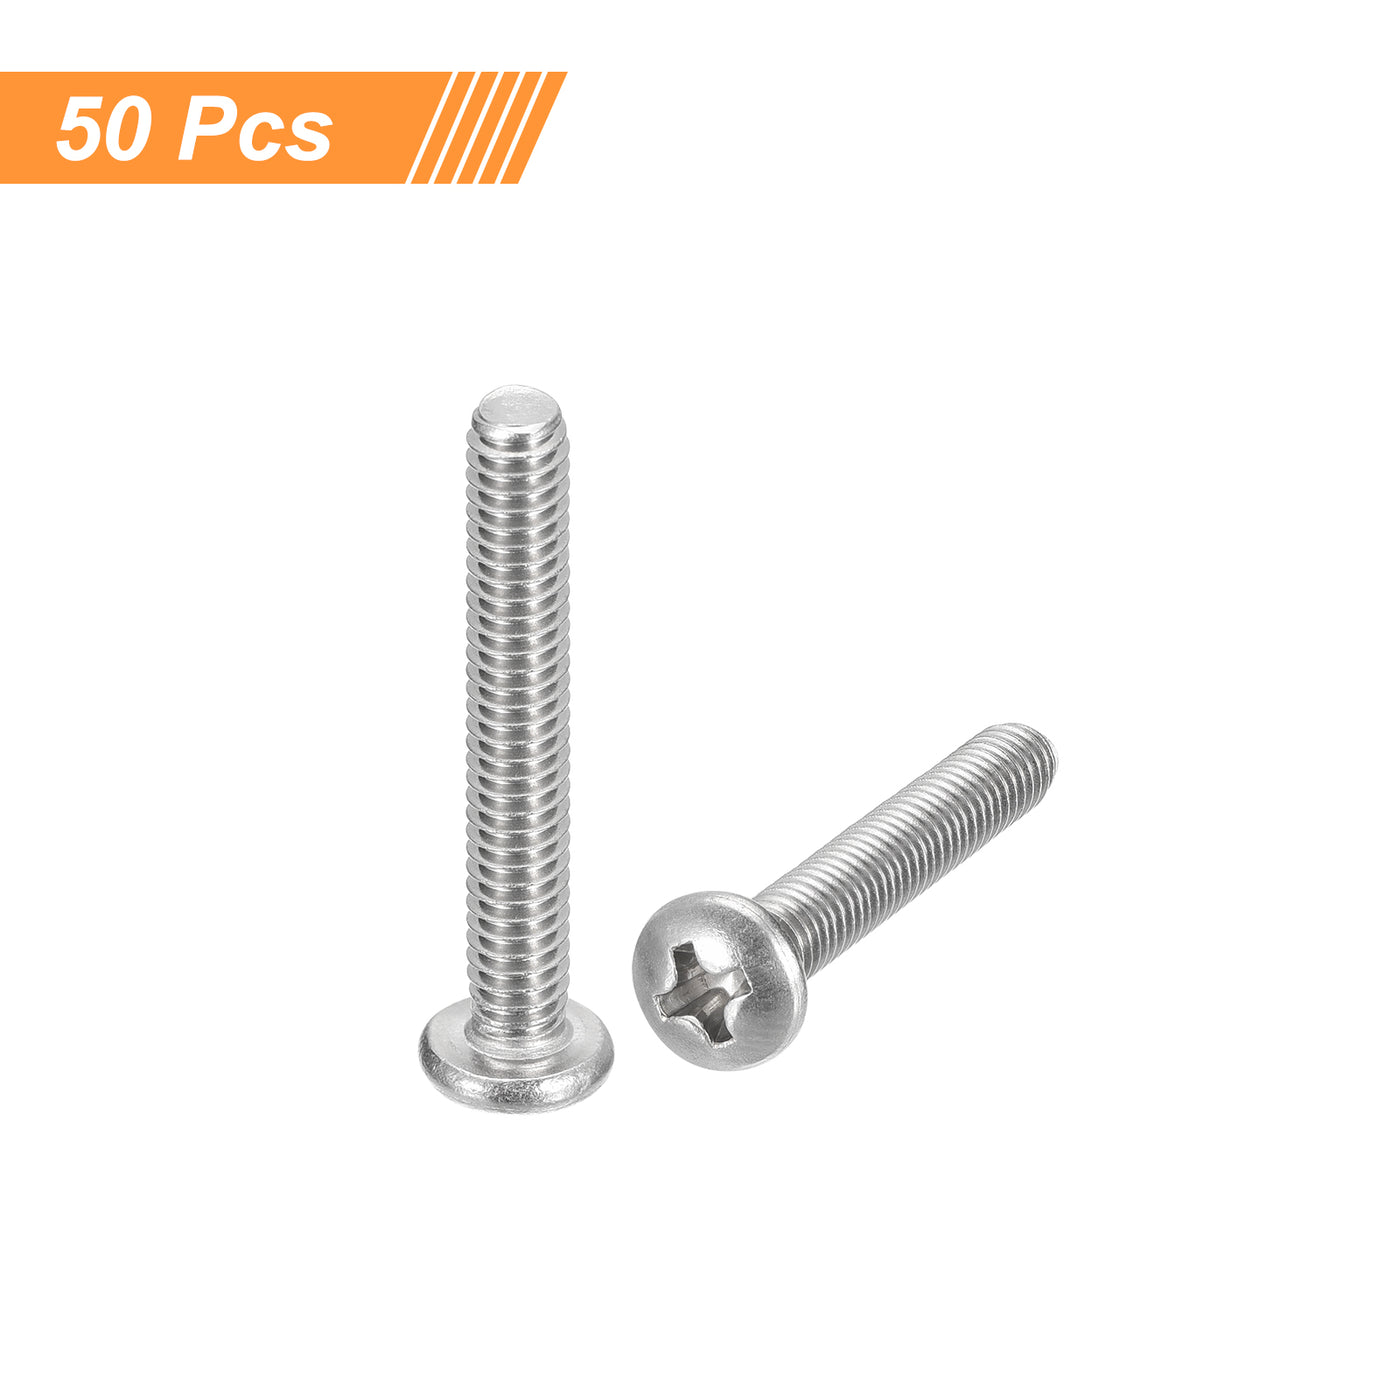 uxcell Uxcell #8-32x1-1/8" Pan Head Machine Screws, Stainless Steel 18-8 Screw, Pack of 50